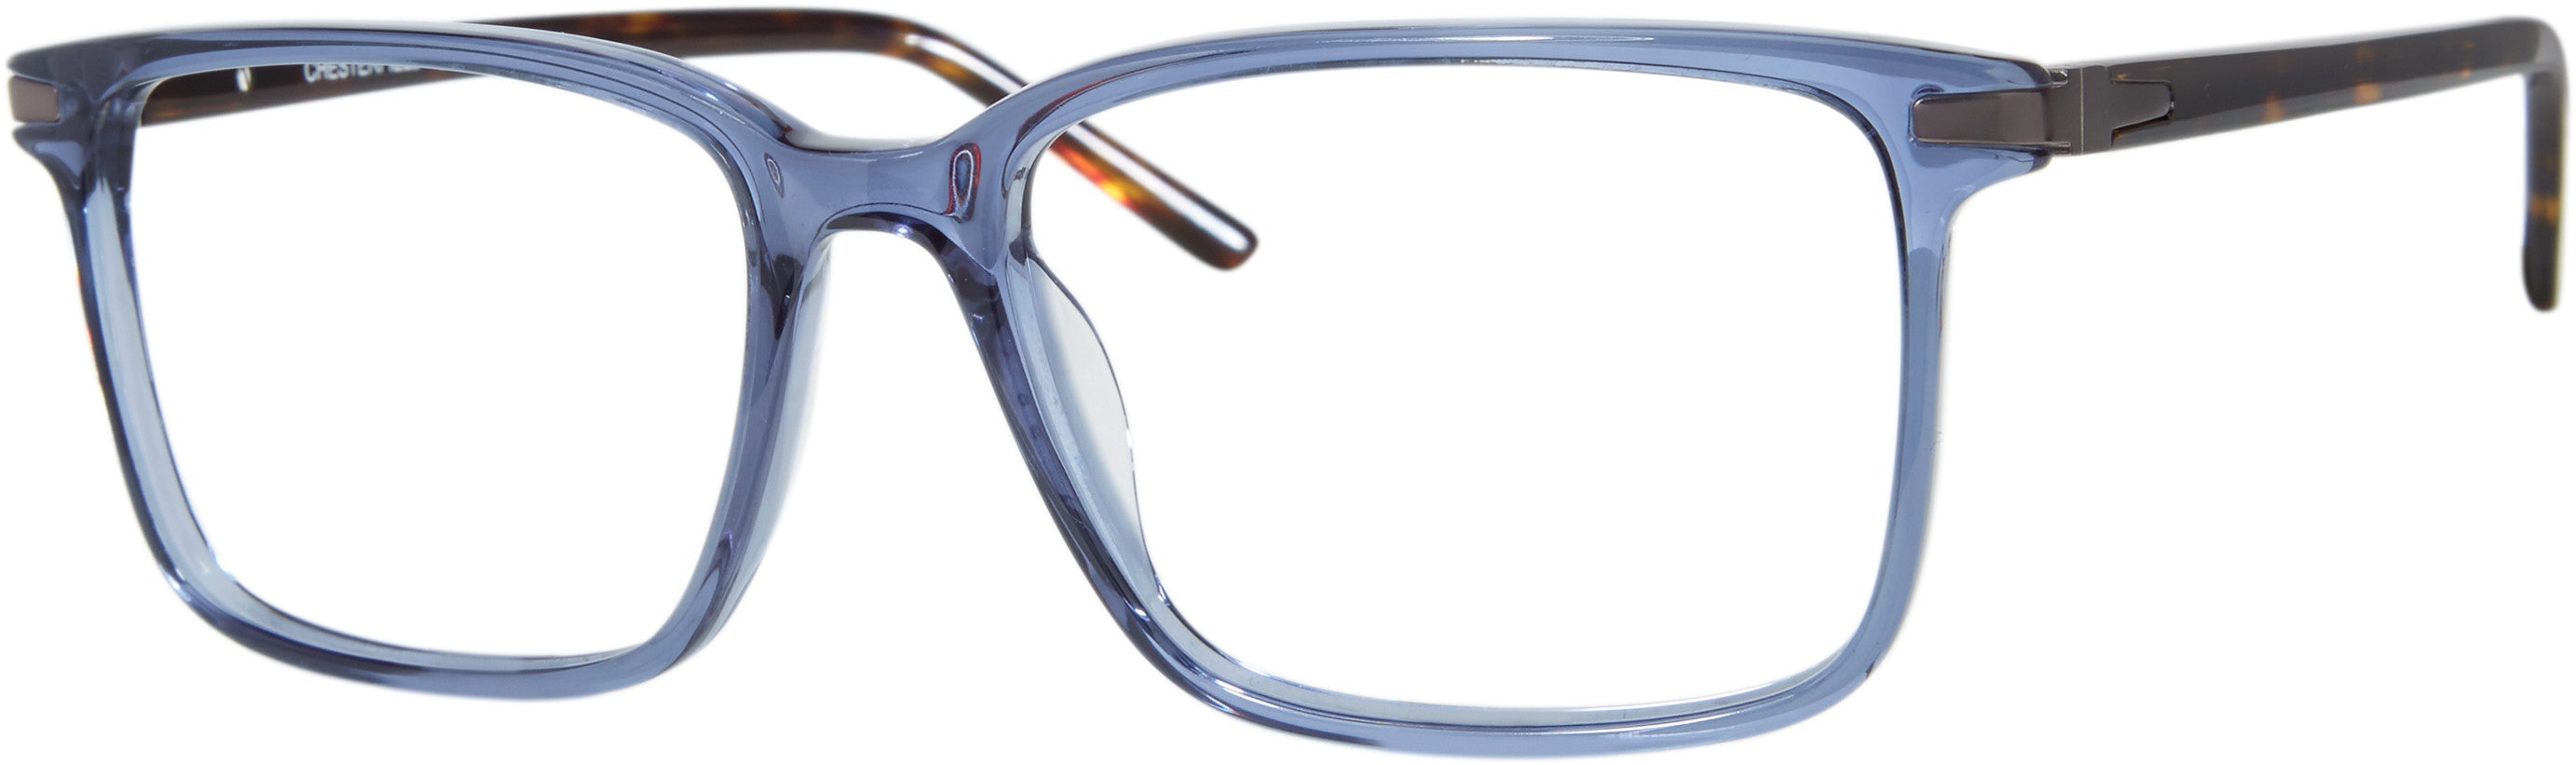  Chesterfield 76XL Square Eyeglasses 0OXZ-0OXZ  Blue Crystal (00 Demo Lens)